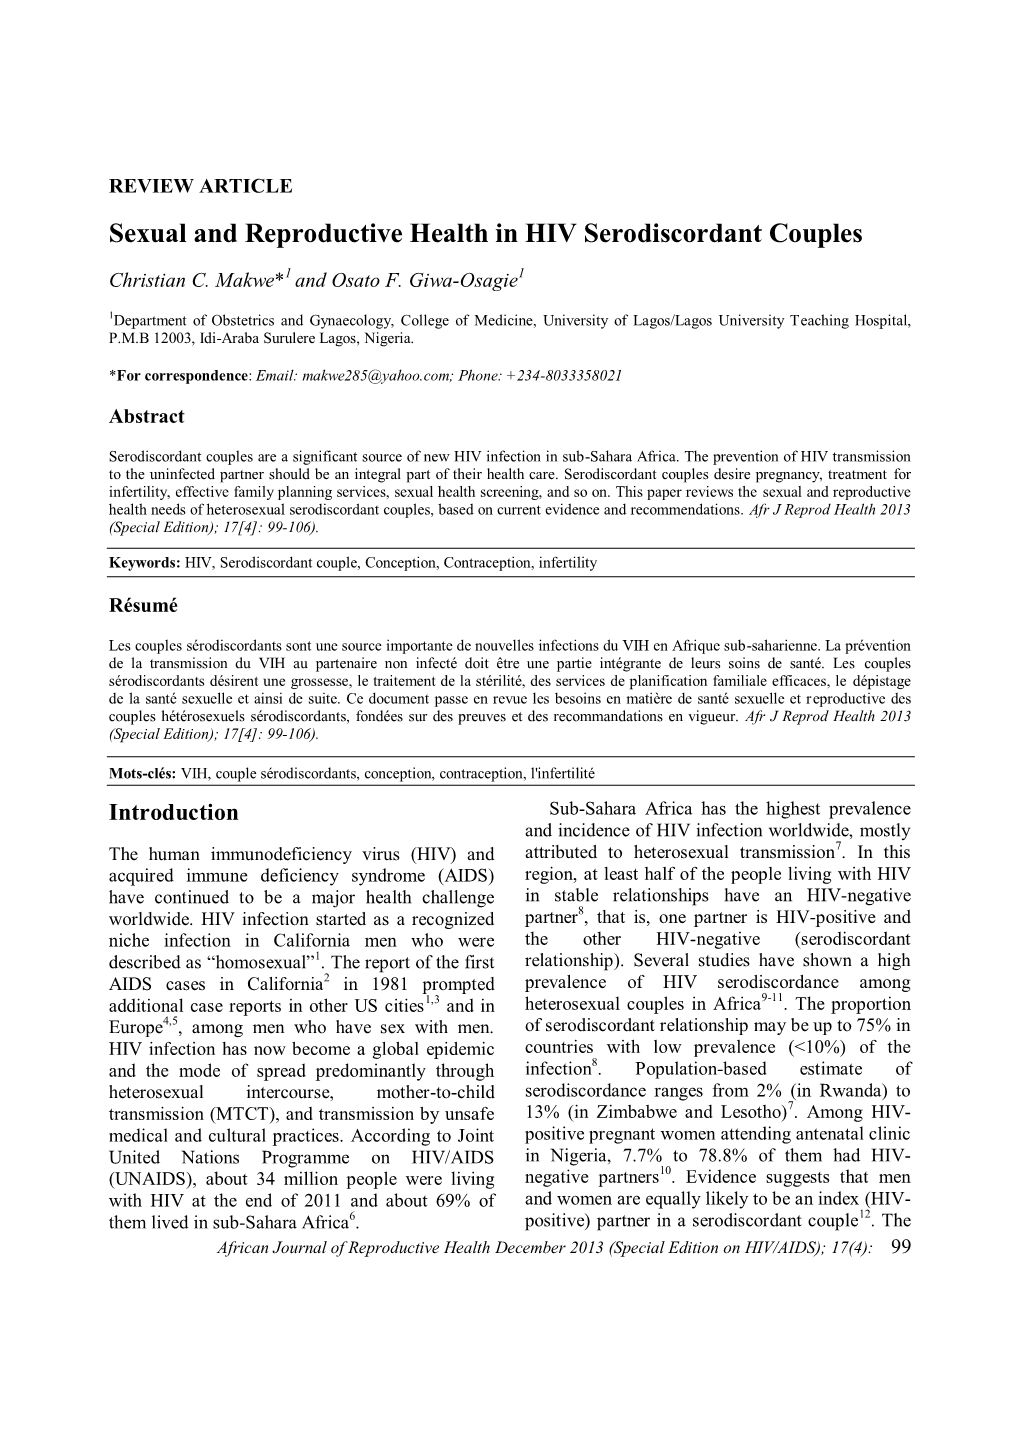 Sexual and Reproductive Health in HIV Serodiscordant Couples